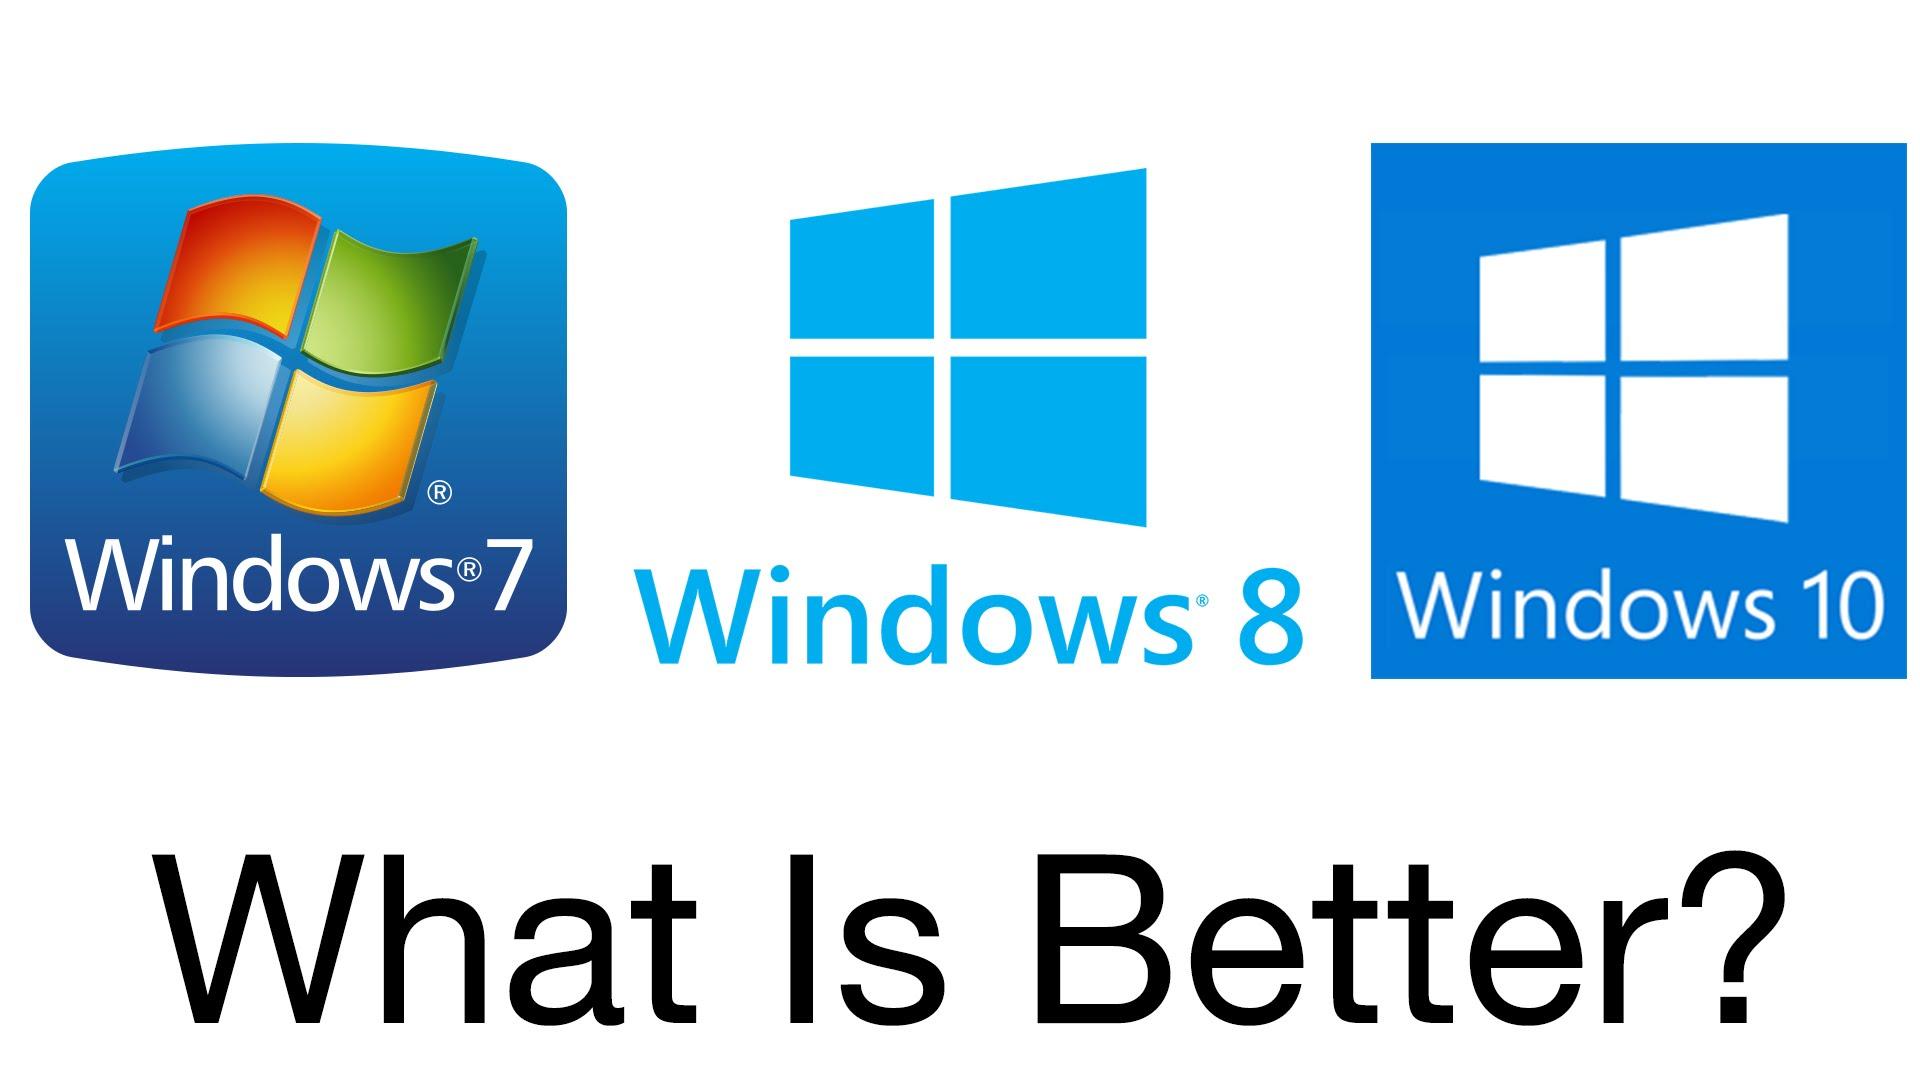 Simple Window 8 Logo - Know the Difference Between Windows 7, Windows 8 and Windows 10 ...